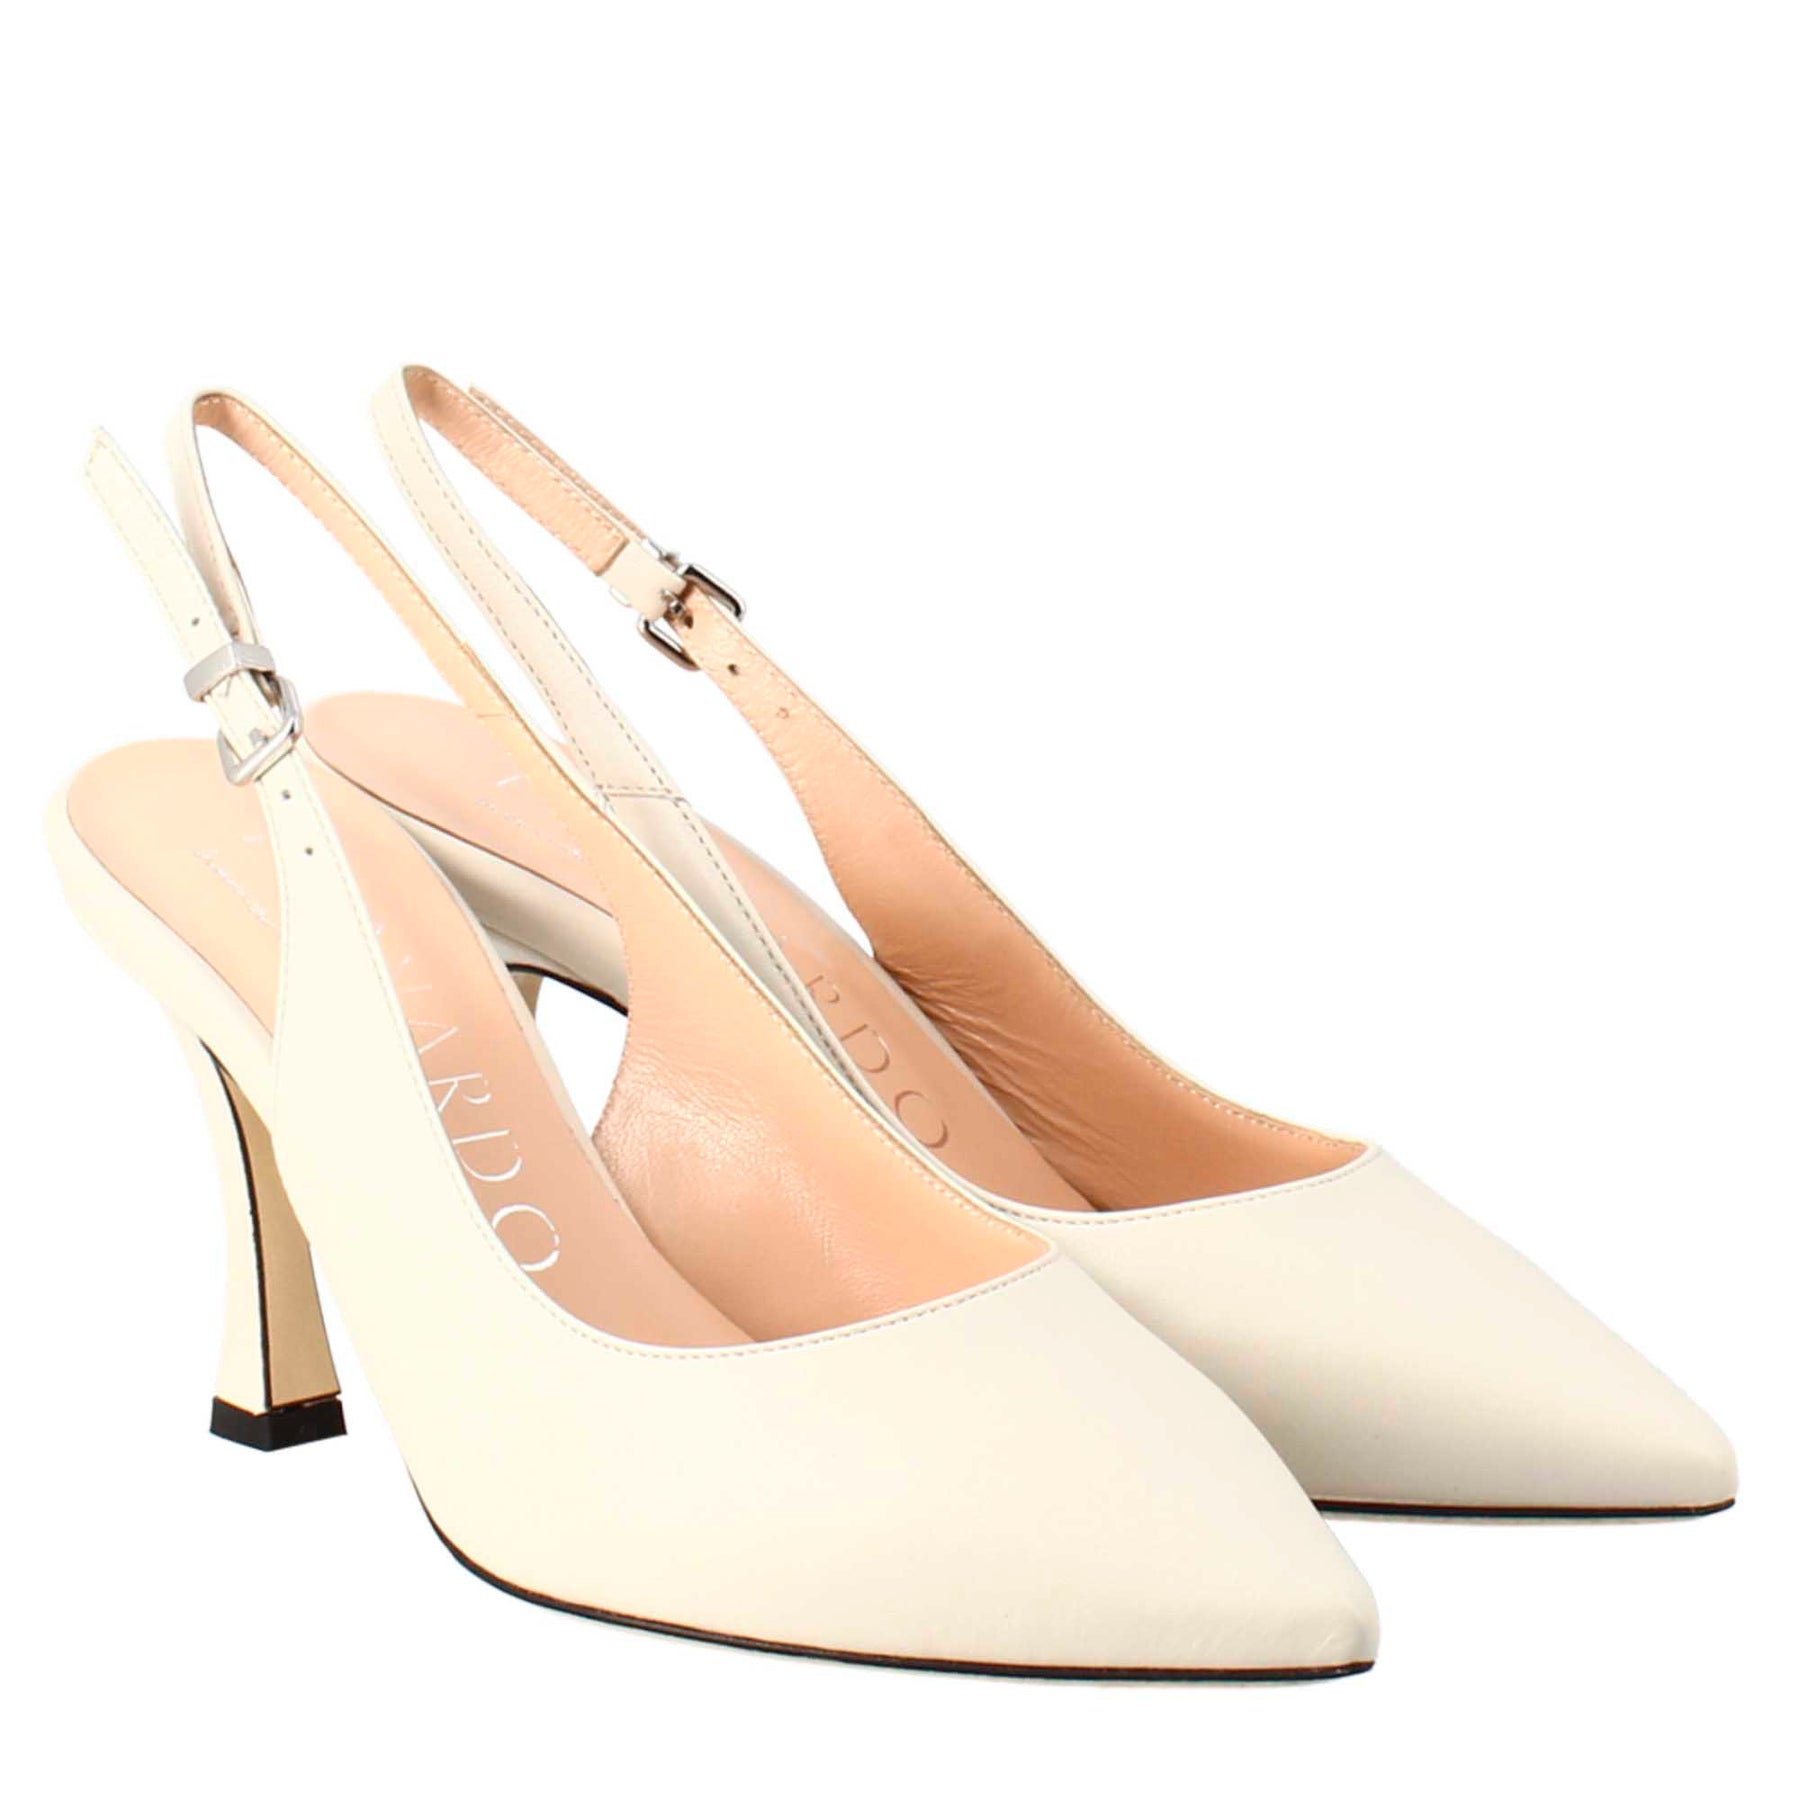 Décolleté high heels for women in cream colored leather